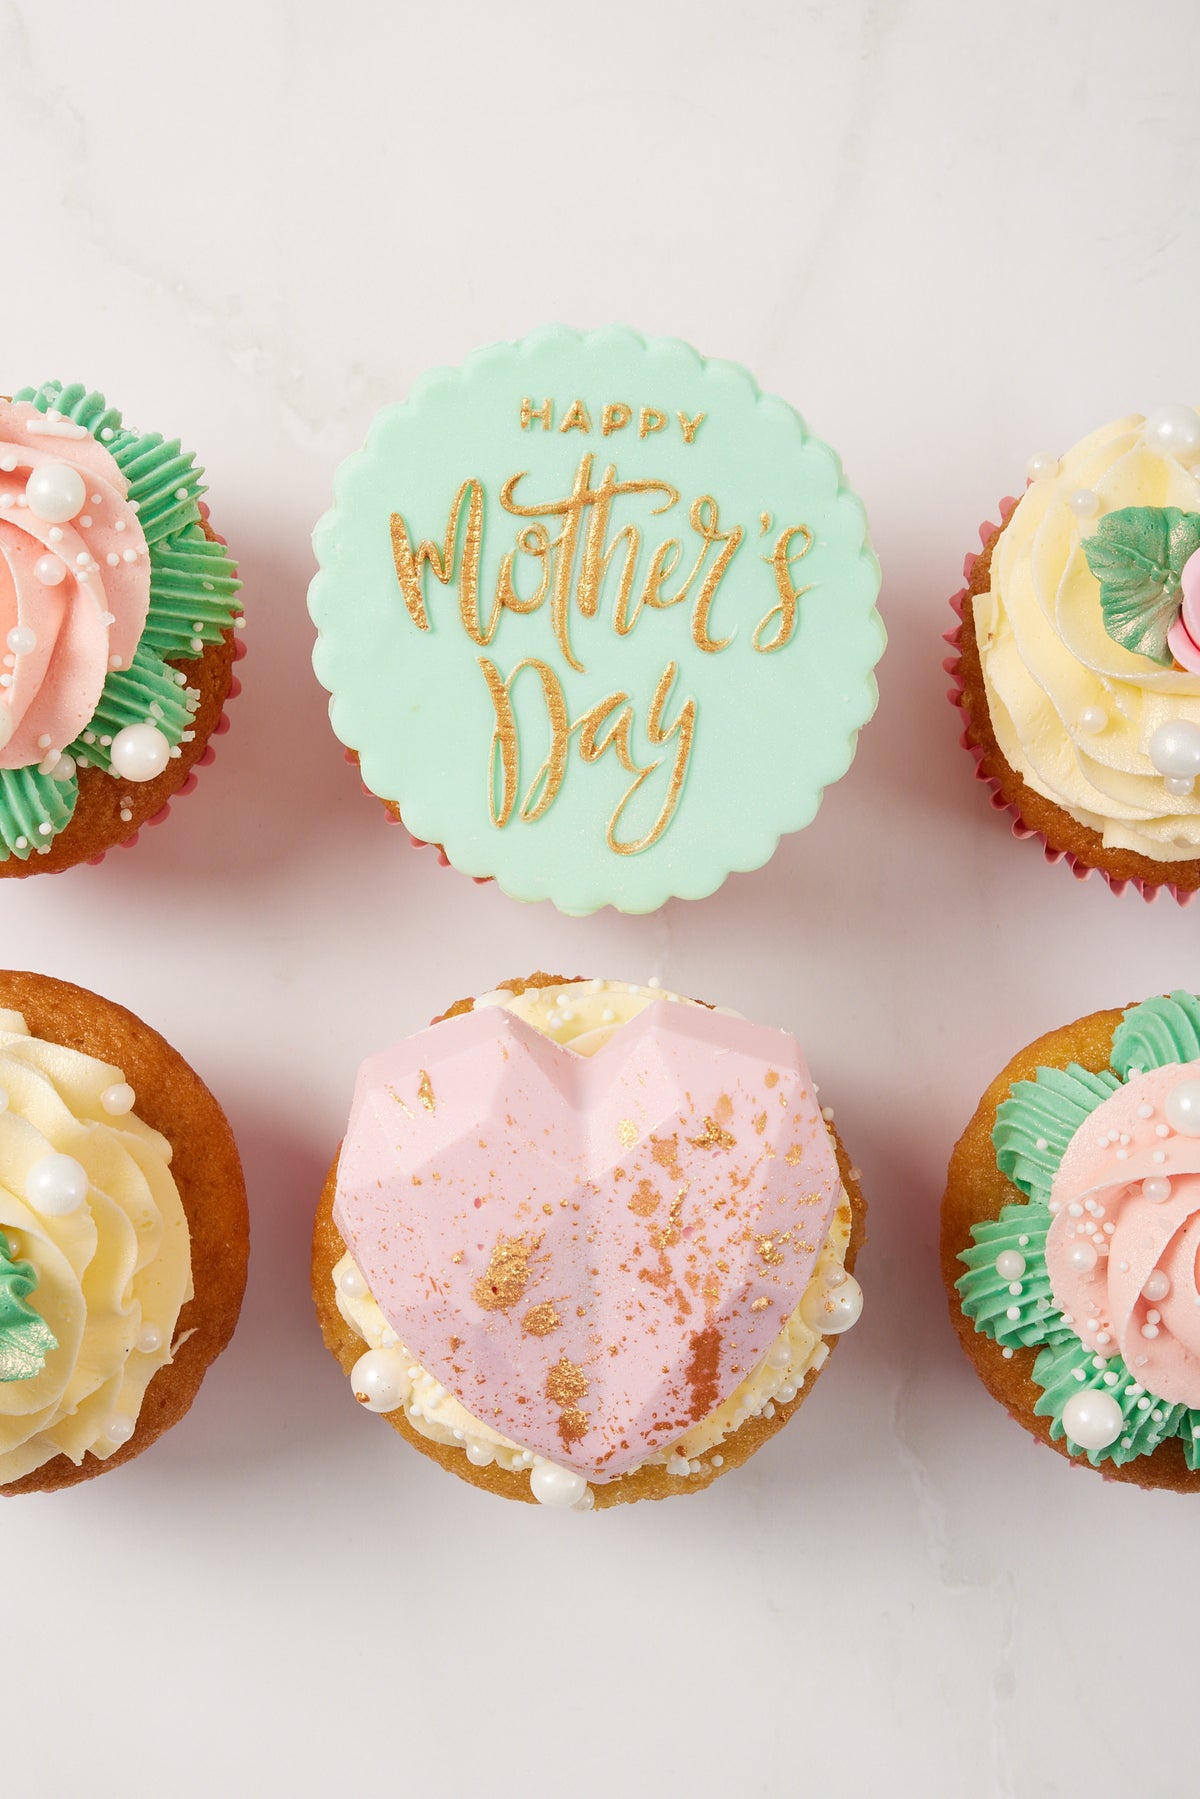 Mother's Day Cupcakes 6 pack